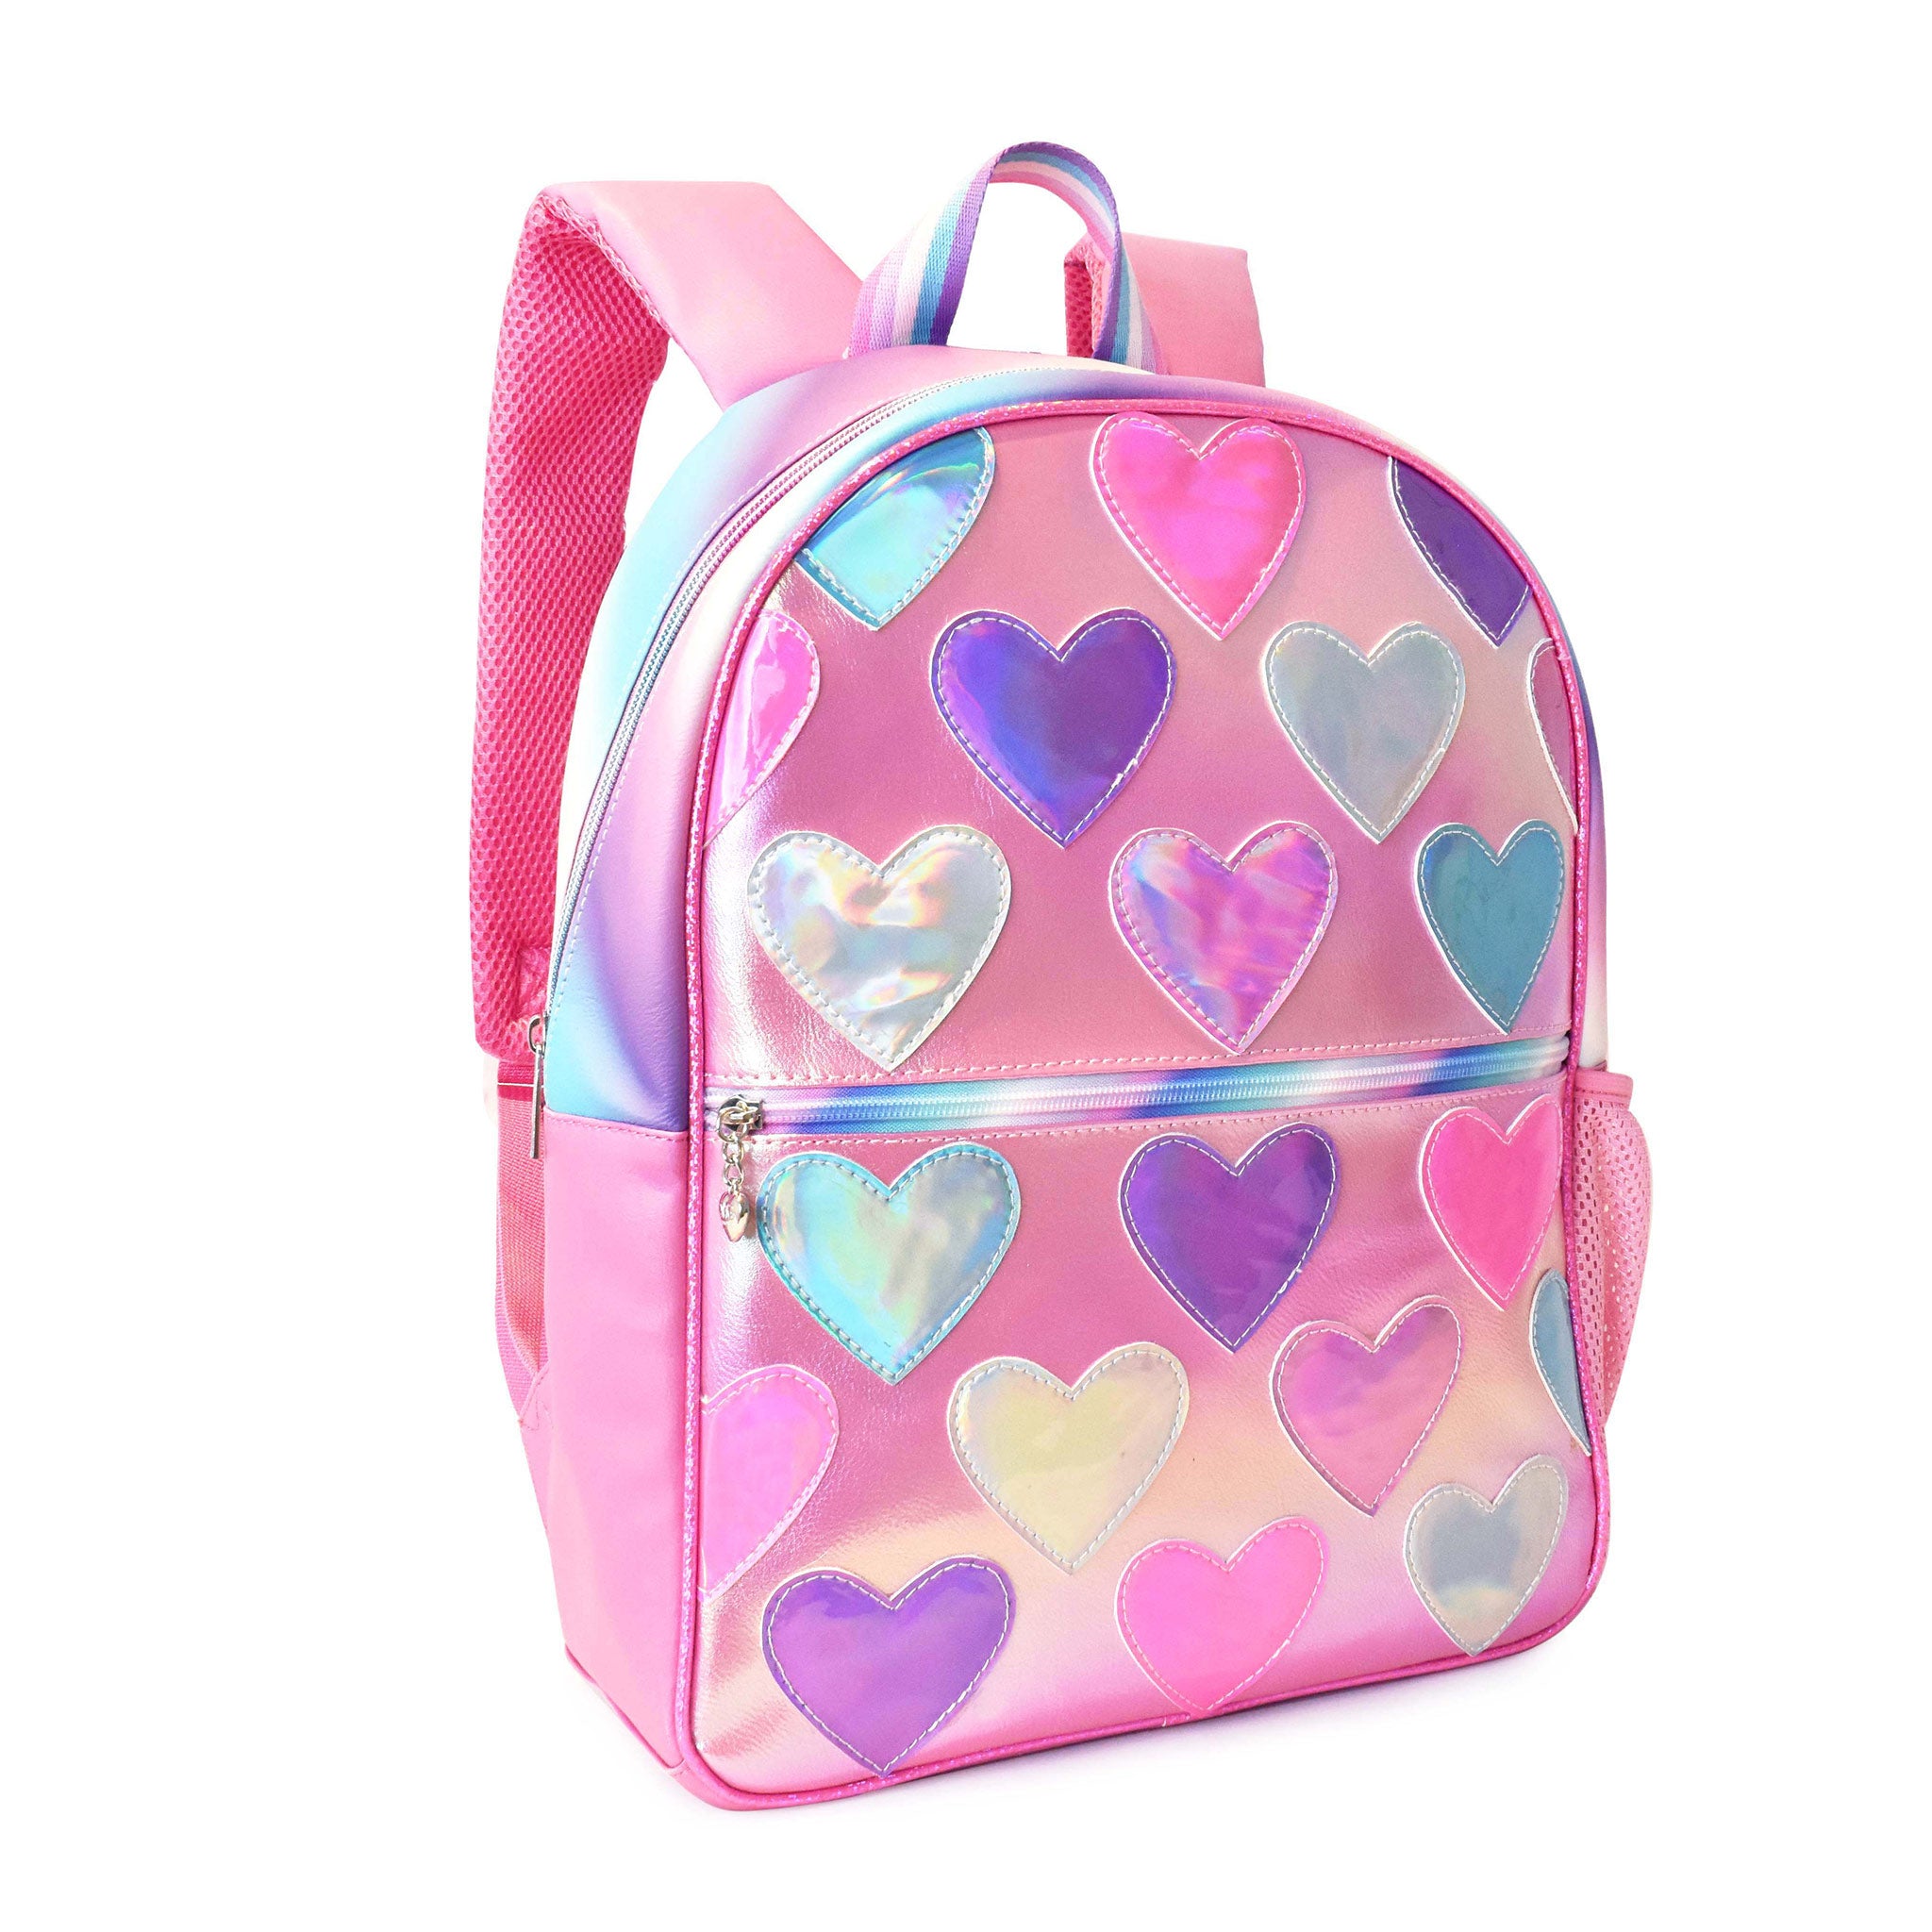 Side view of a metallic heart-patched large backpack